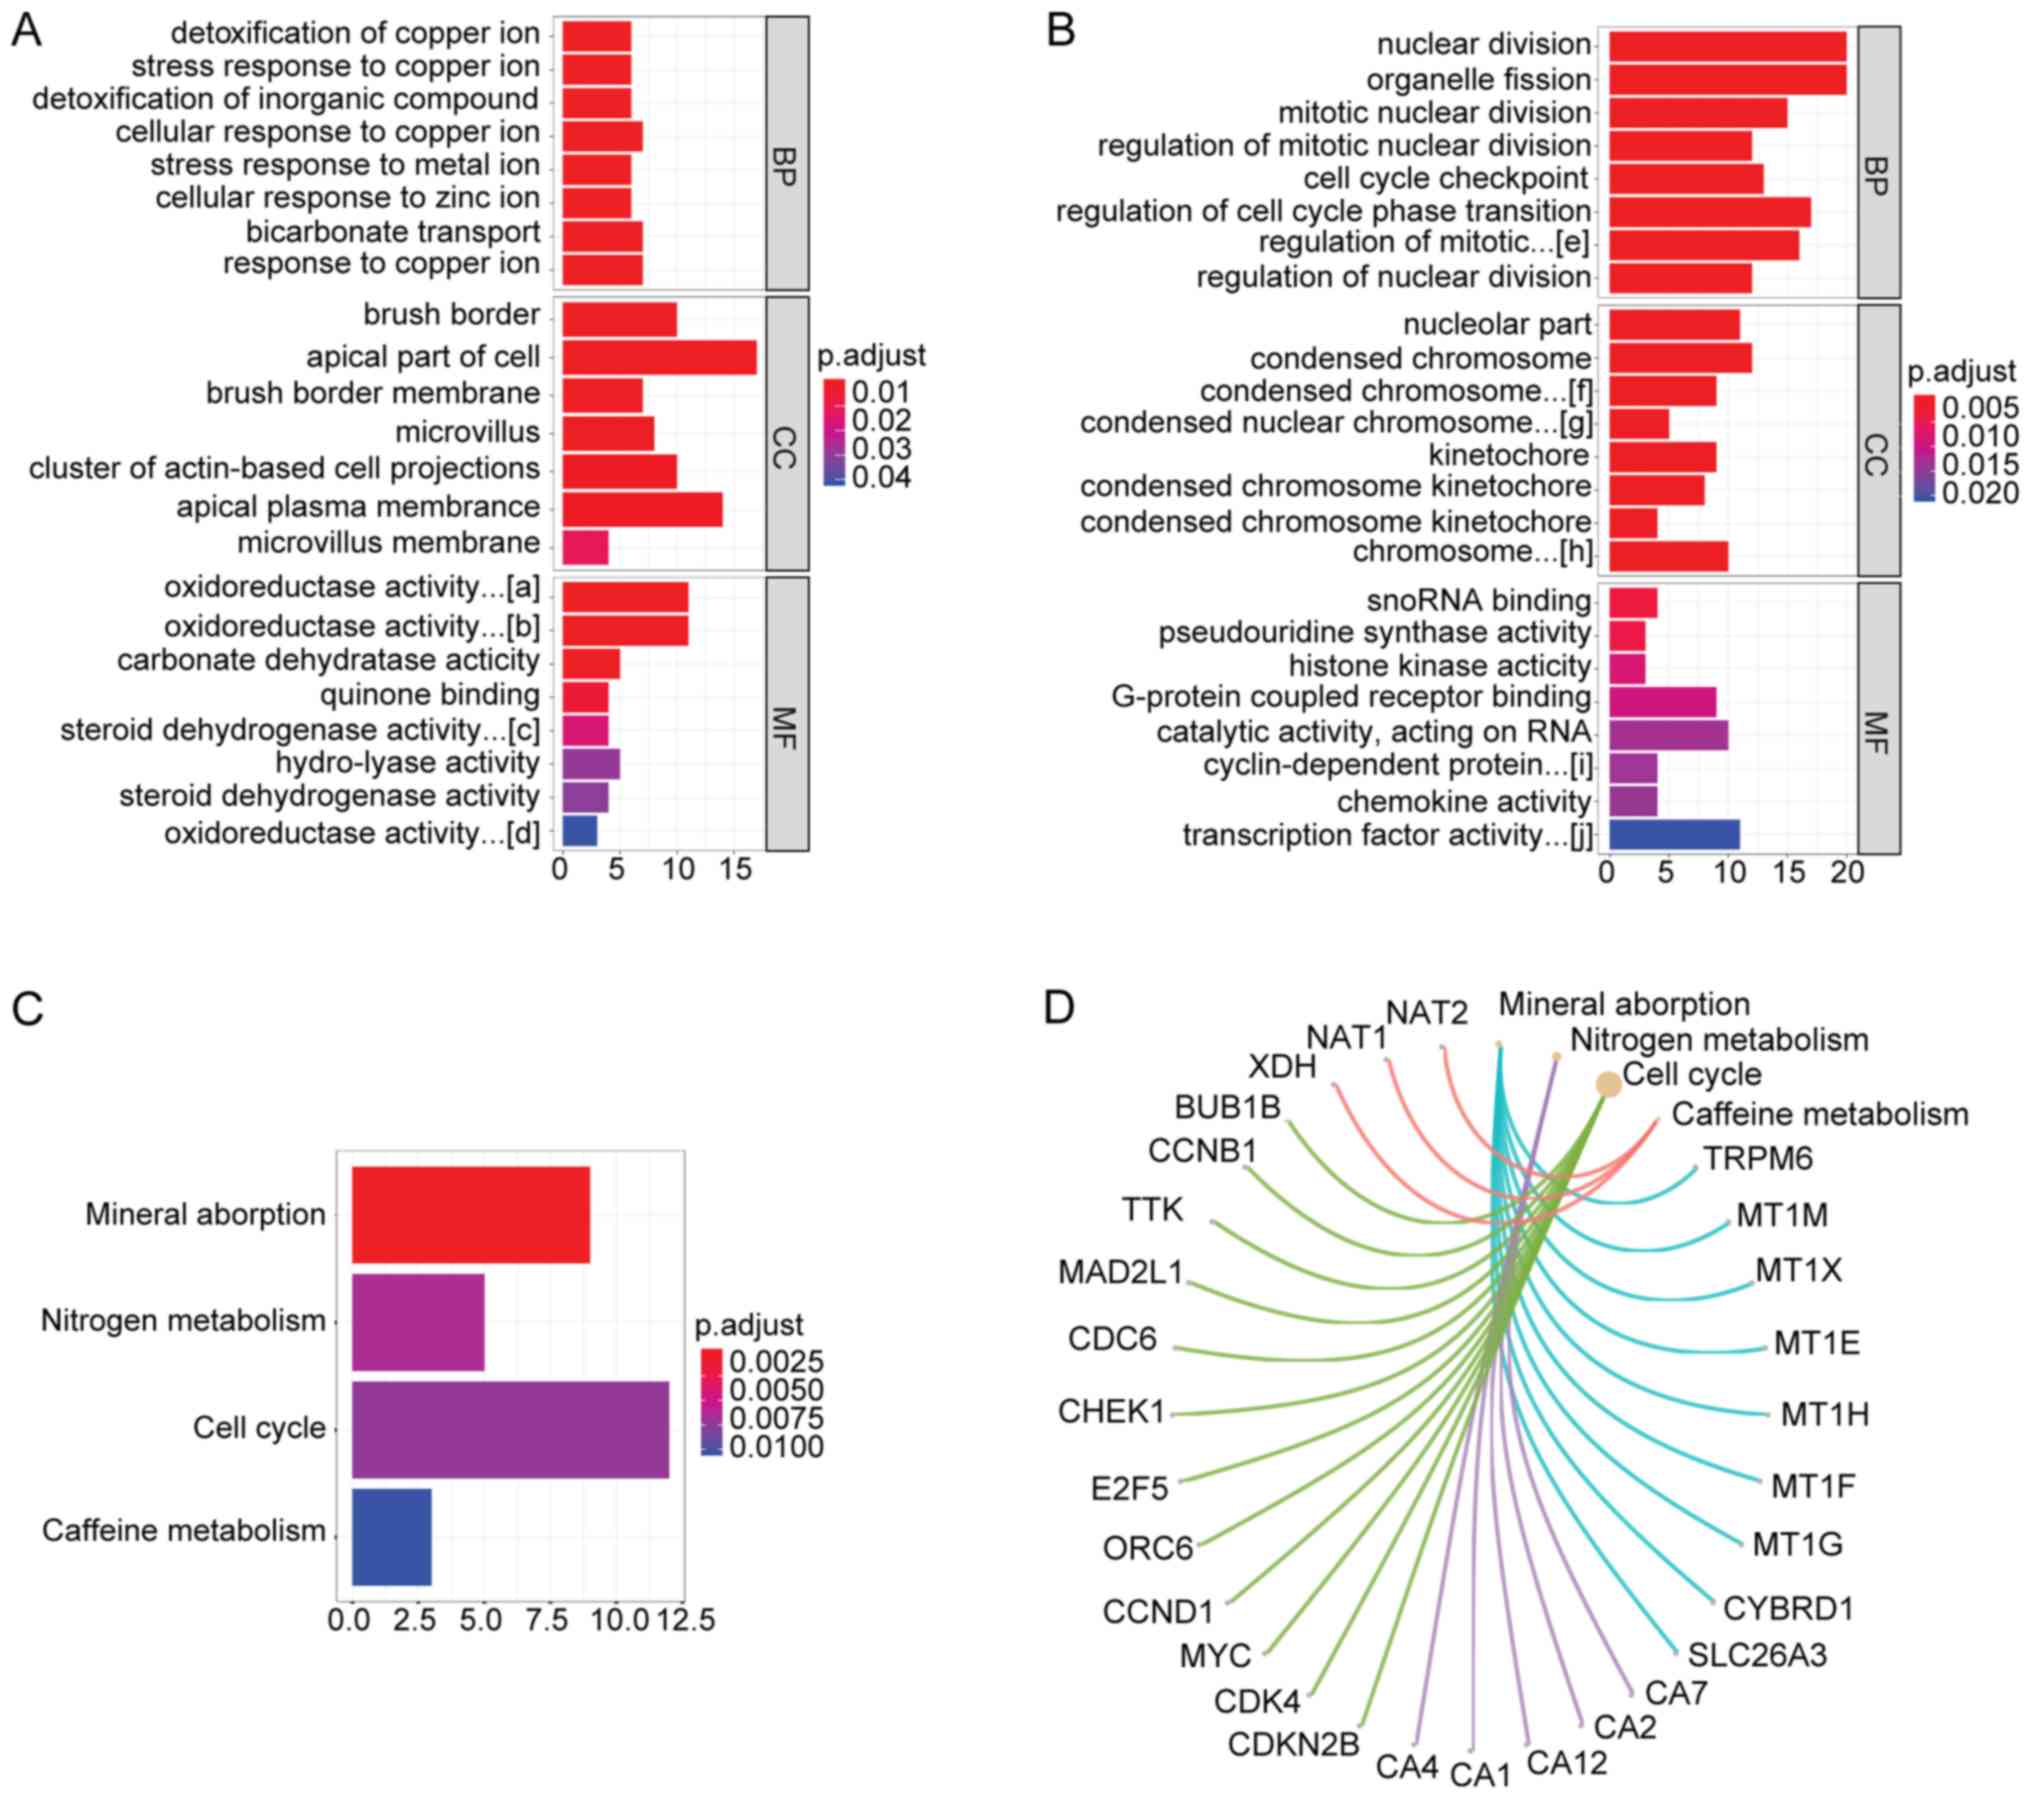 Espere entre Tranquilidad de espíritu Screening key genes and signaling pathways in colorectal cancer by  integrated bioinformatics analysis